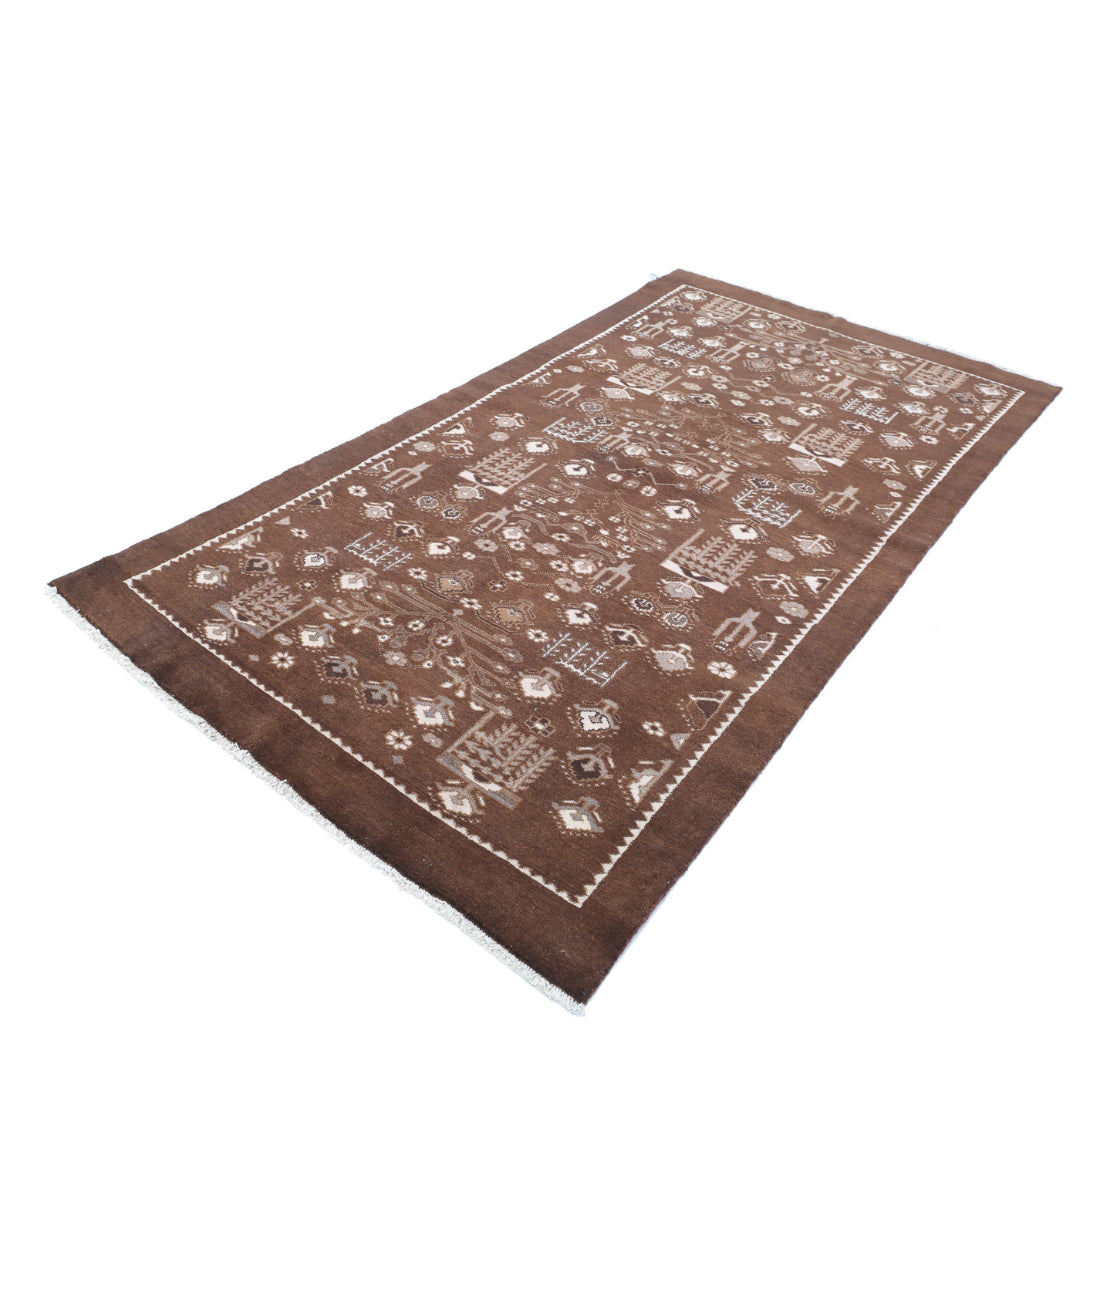 Gabbeh 4'9'' X 9'0'' Hand-Knotted Wool Rug 4'9'' x 9'0'' (143 X 270) / Brown / Ivory